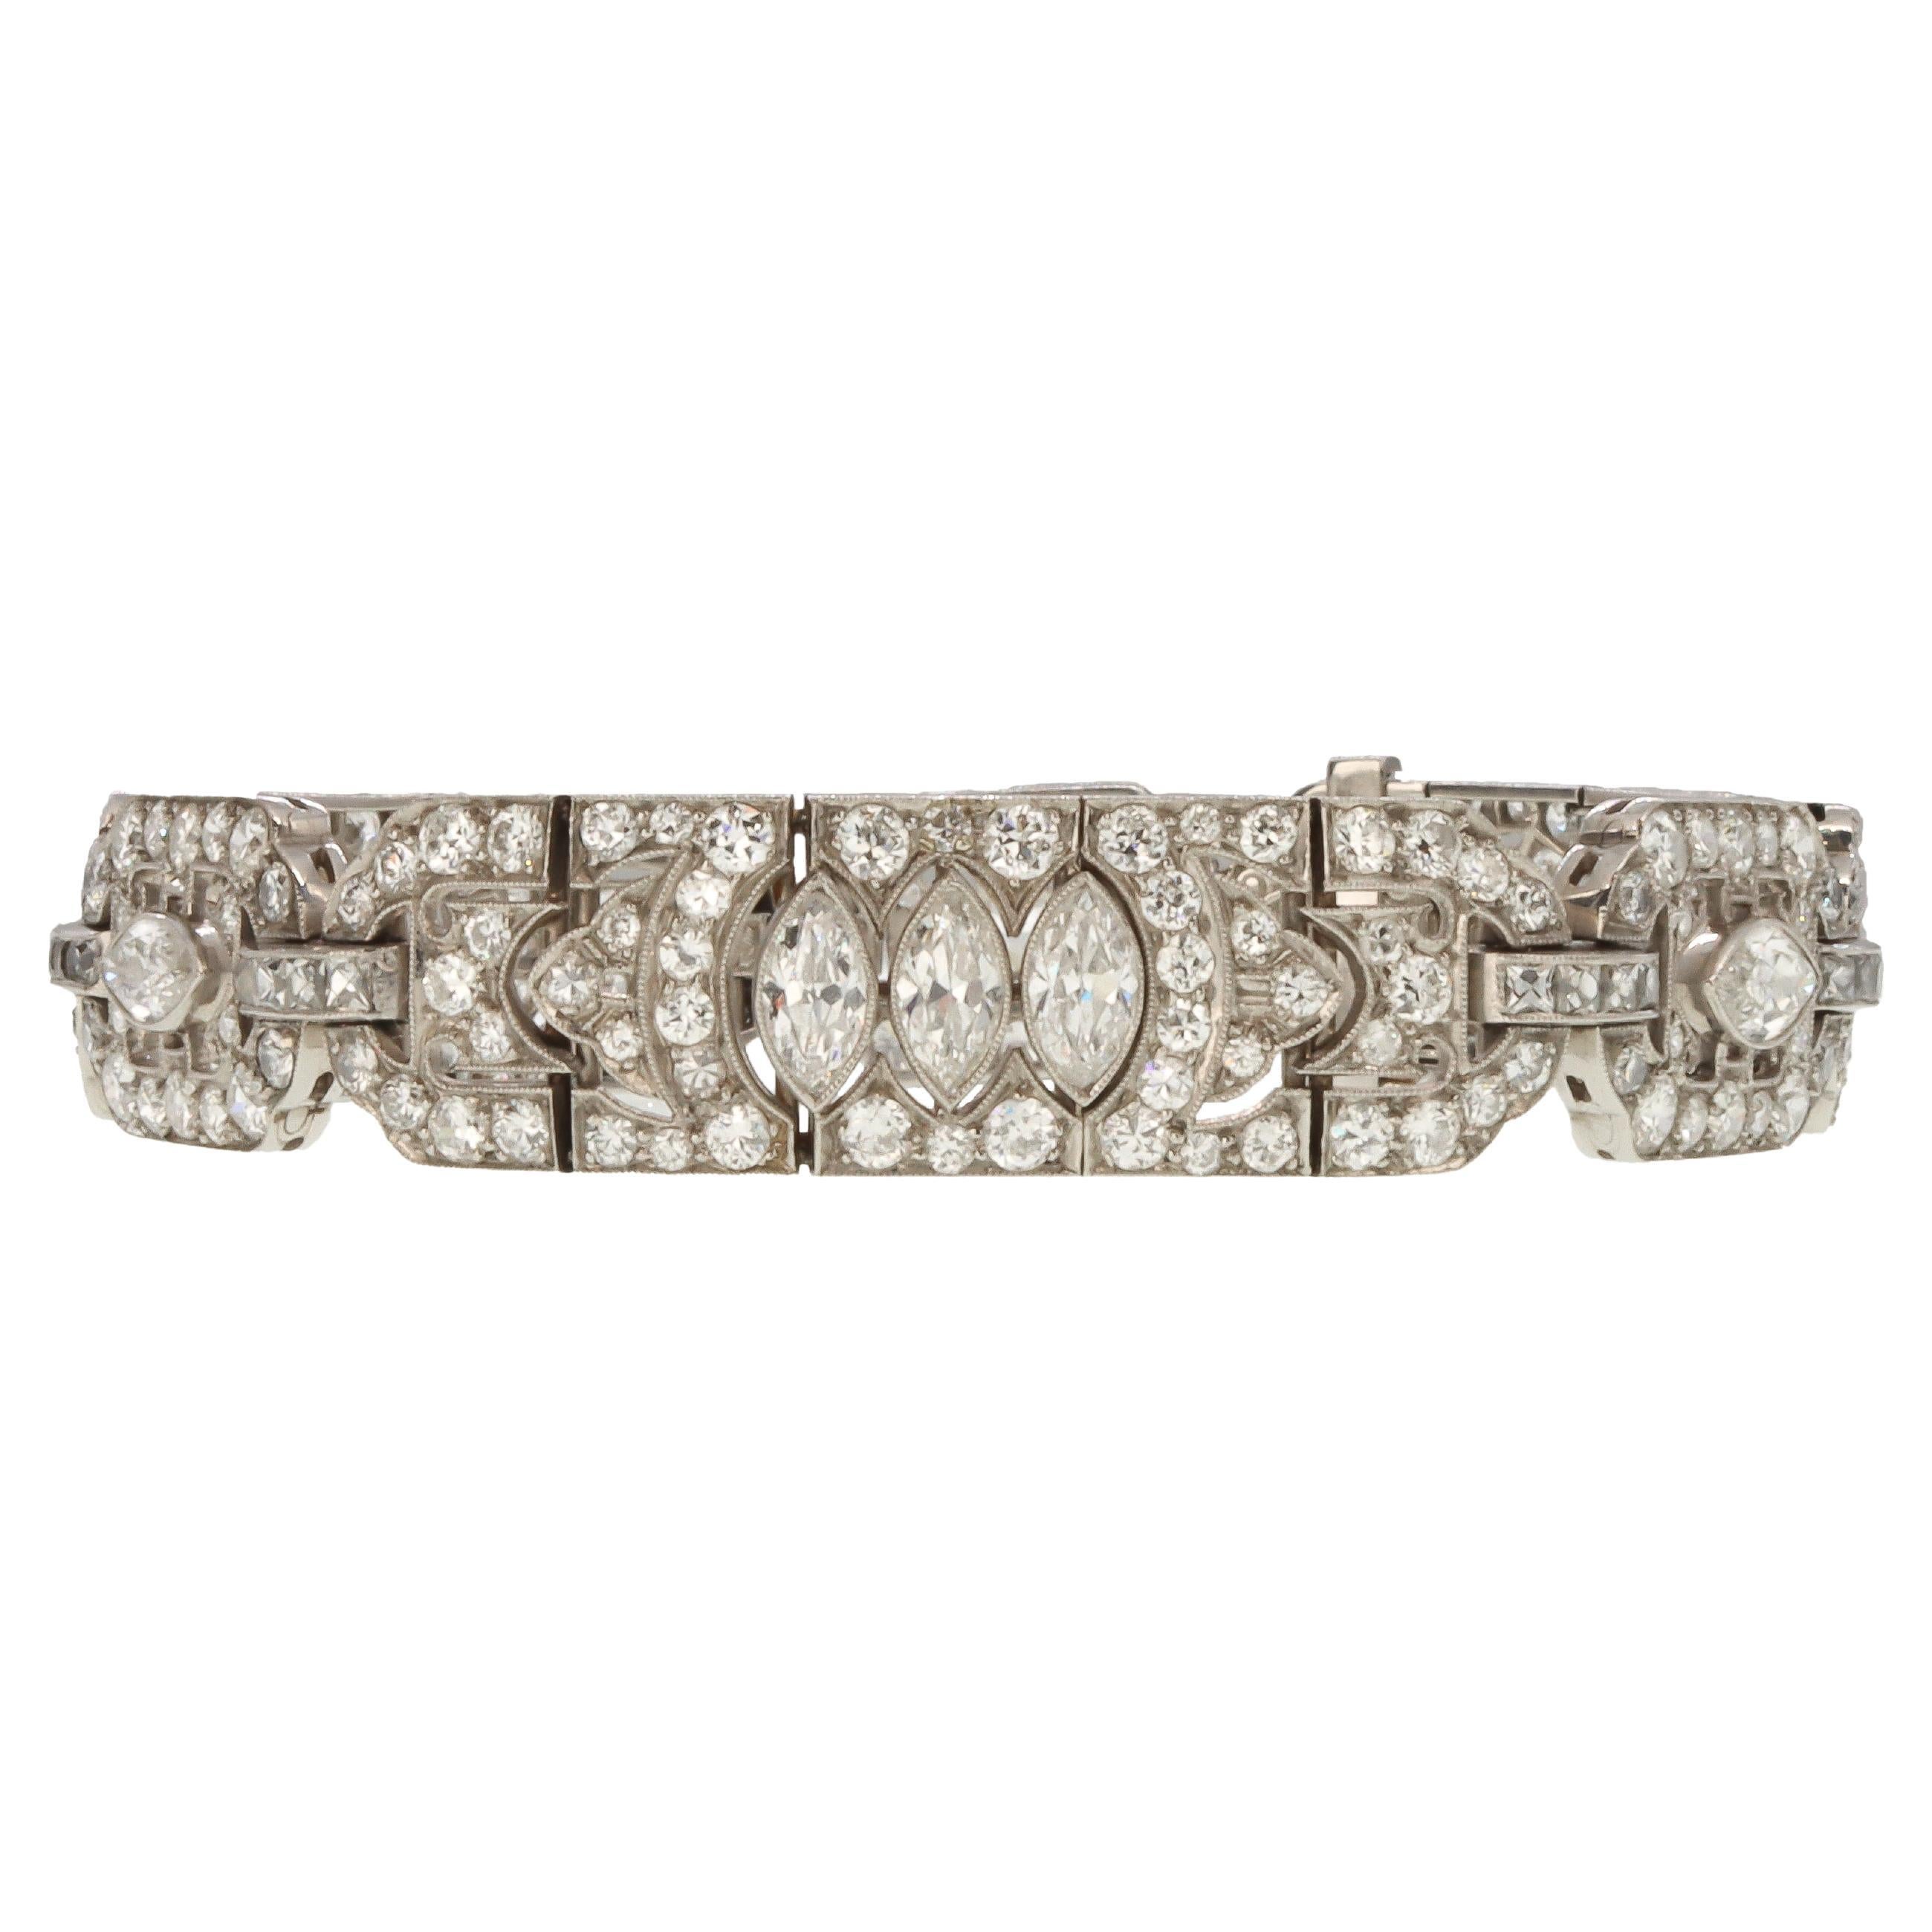 This exceptional Tiffany & Co. Diamond and Platinum Art Deco Bracelet consists of six sections set with two hundred and fifty two diamonds totalling an estimated 9.05 carats. The diamonds consist of twelve Marquise cut, two hundred and sixteen Round